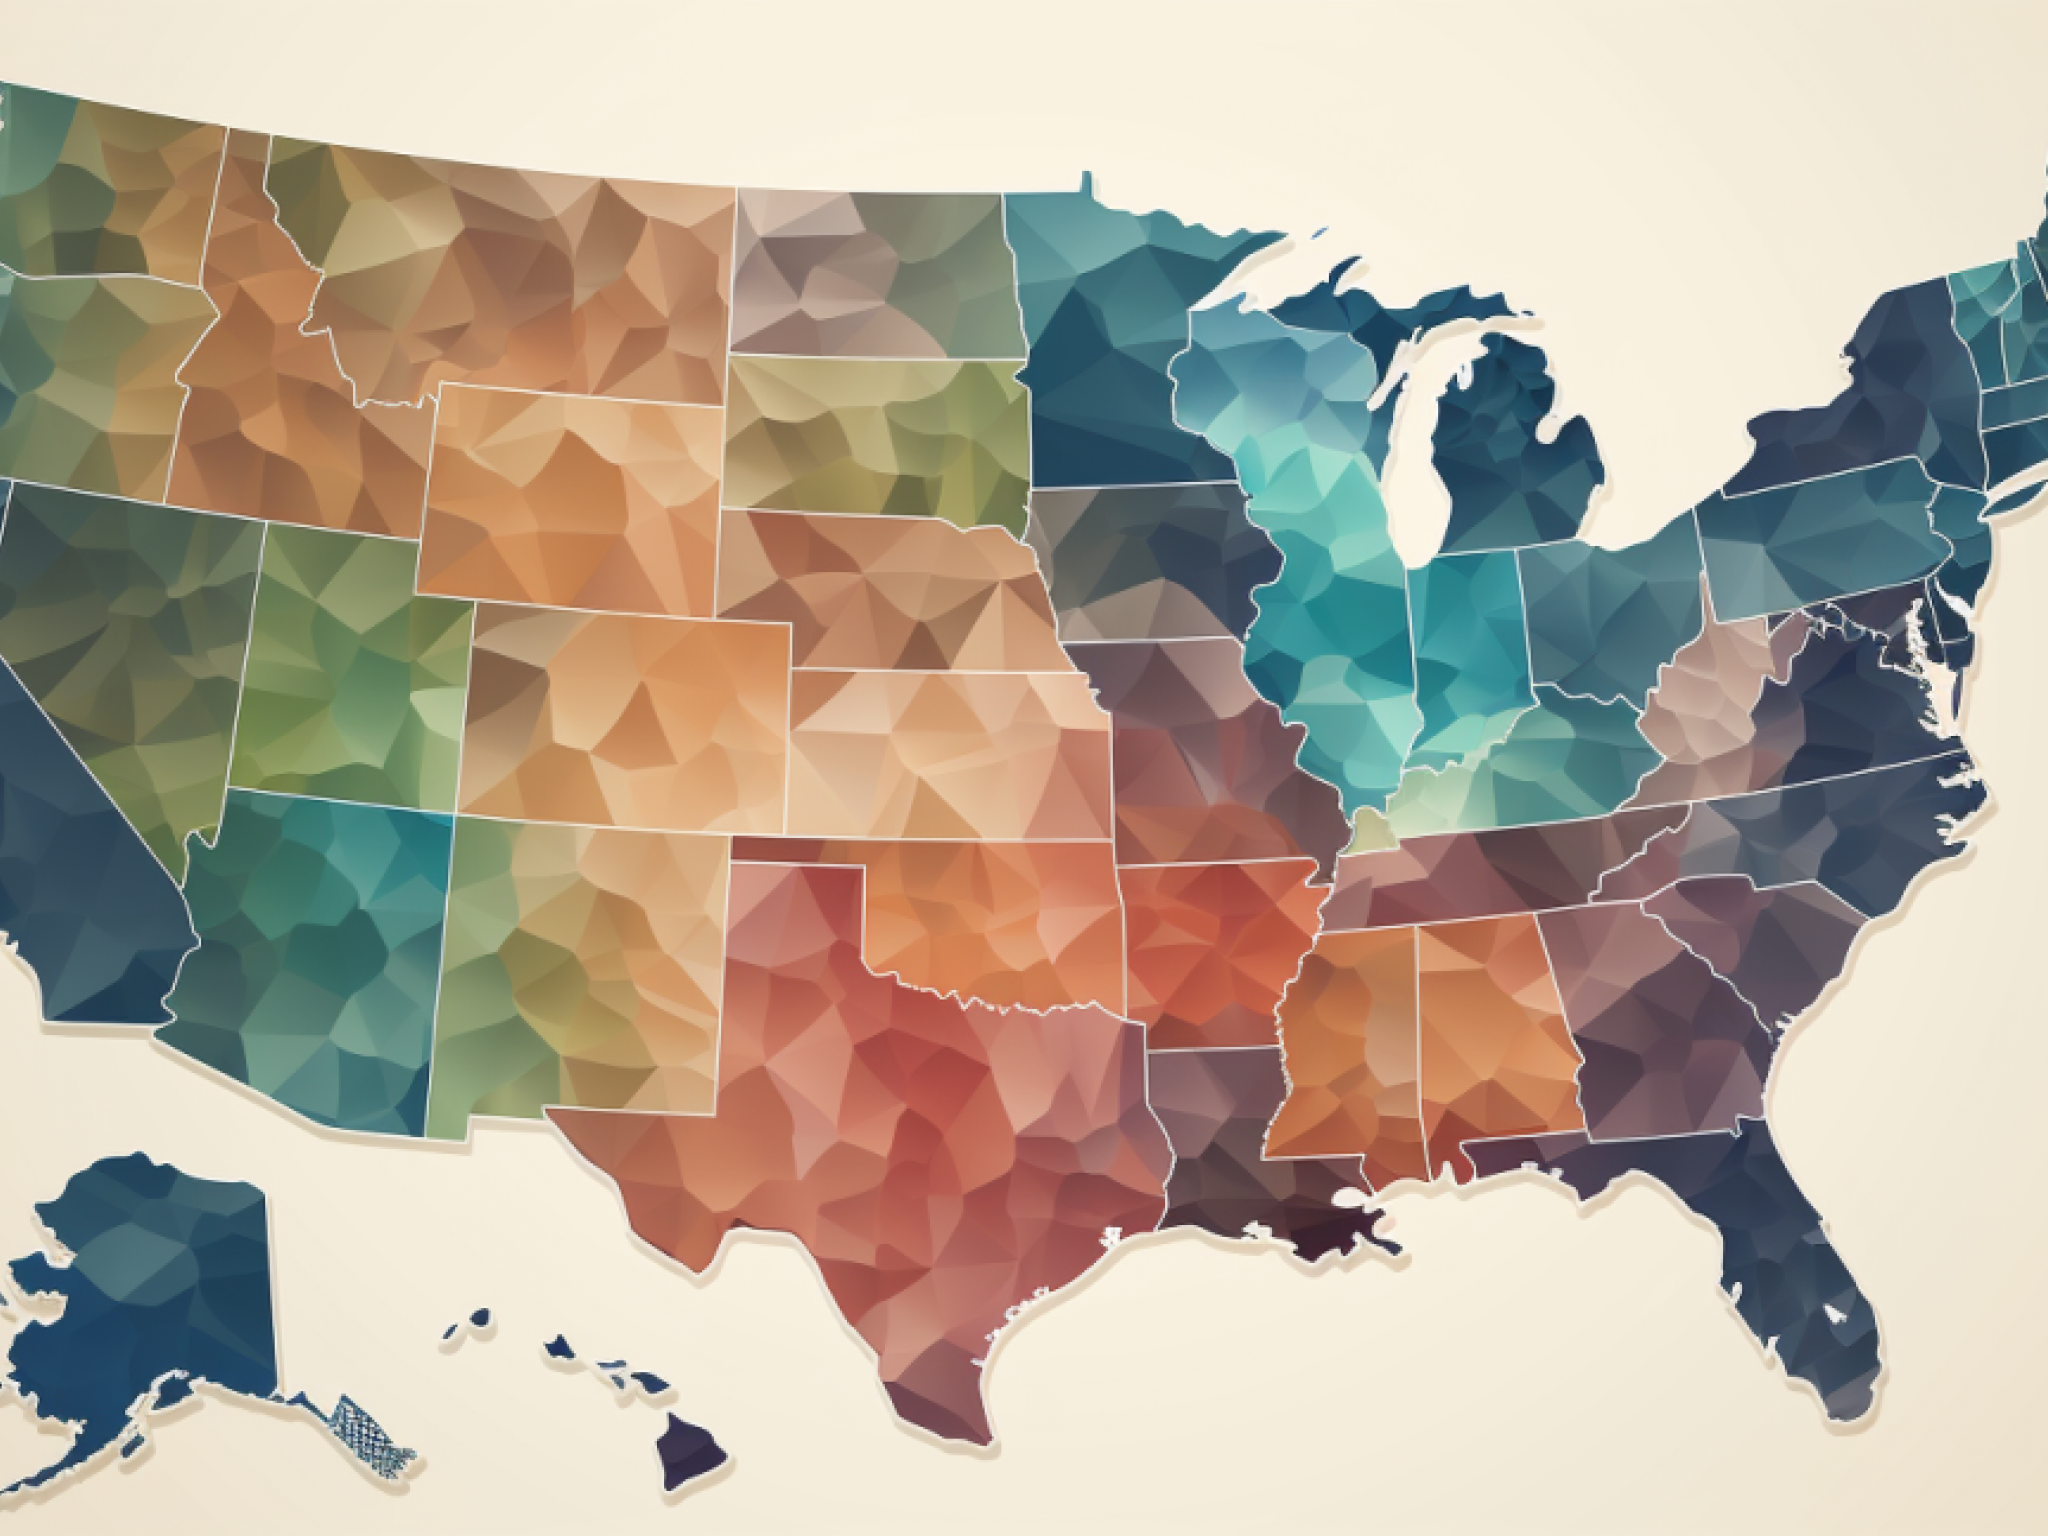  salary-spectrum-heres-how-much-money-you-need-just-to-get-by-in-each-us-state 